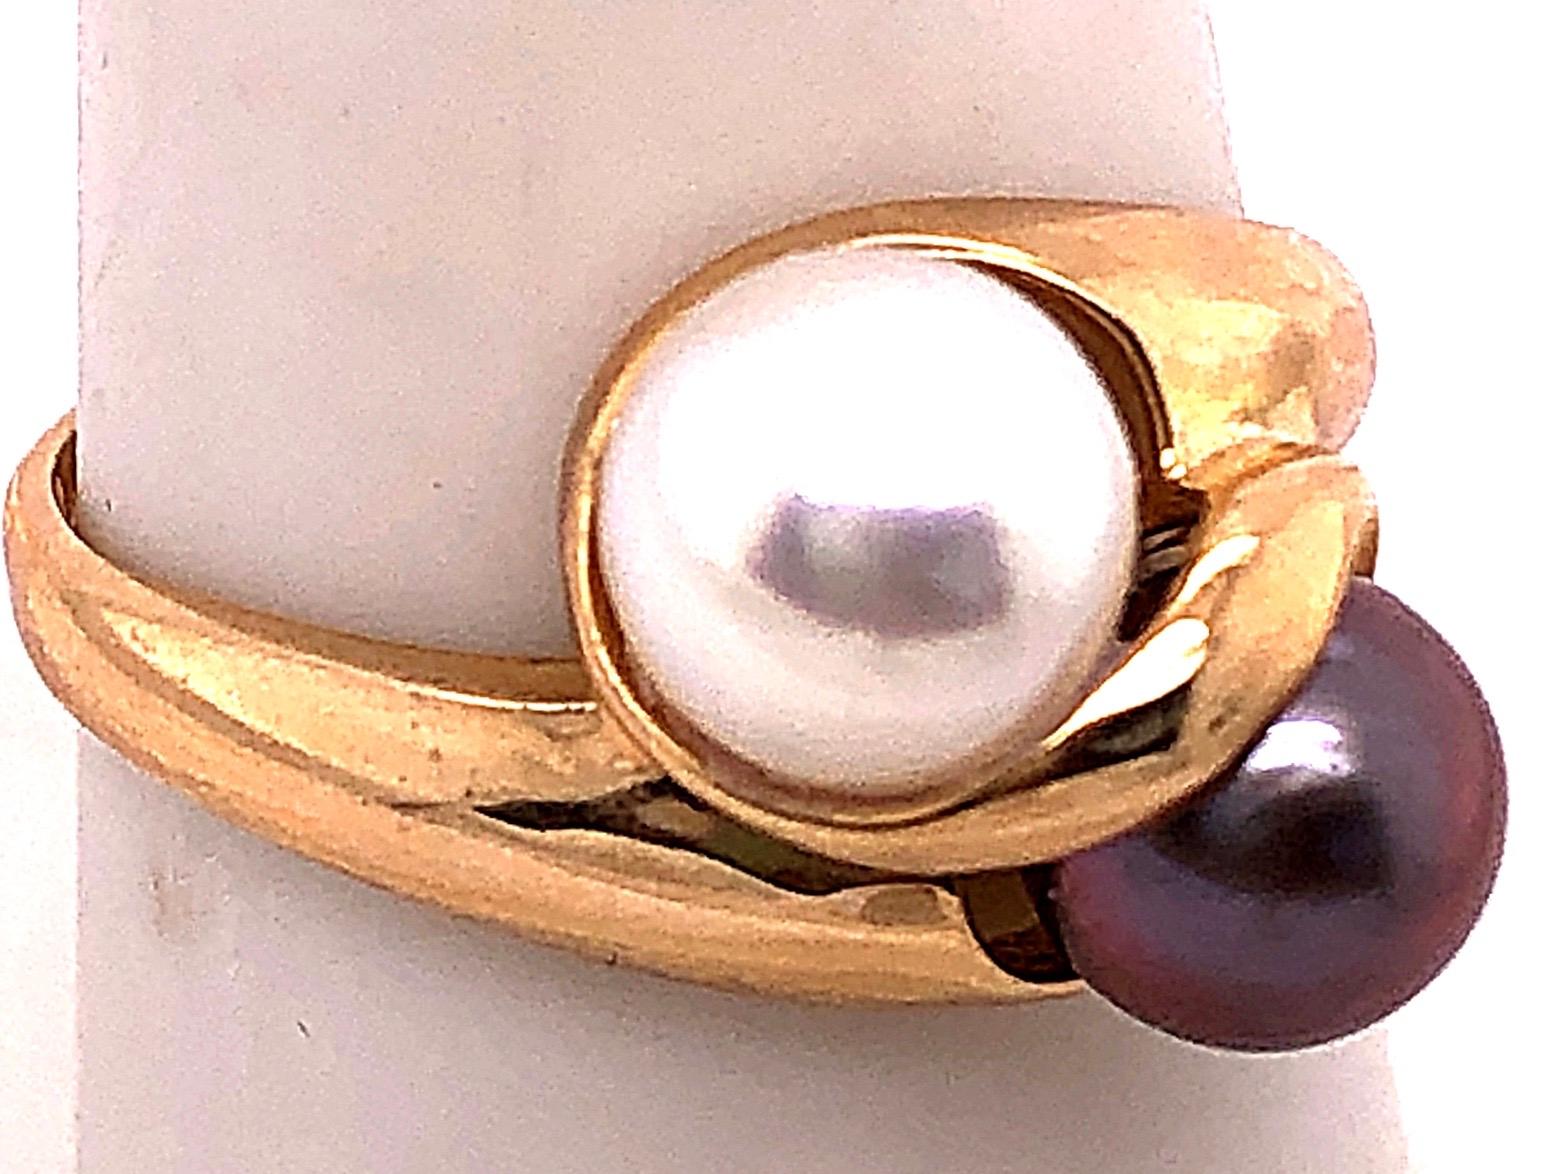 14 Karat Yellow Gold White and Black Pearl Free Form Ring
2 piece cultured pearls 6.00 by 6.00 mm
Size 9.5
4 grams total weight.